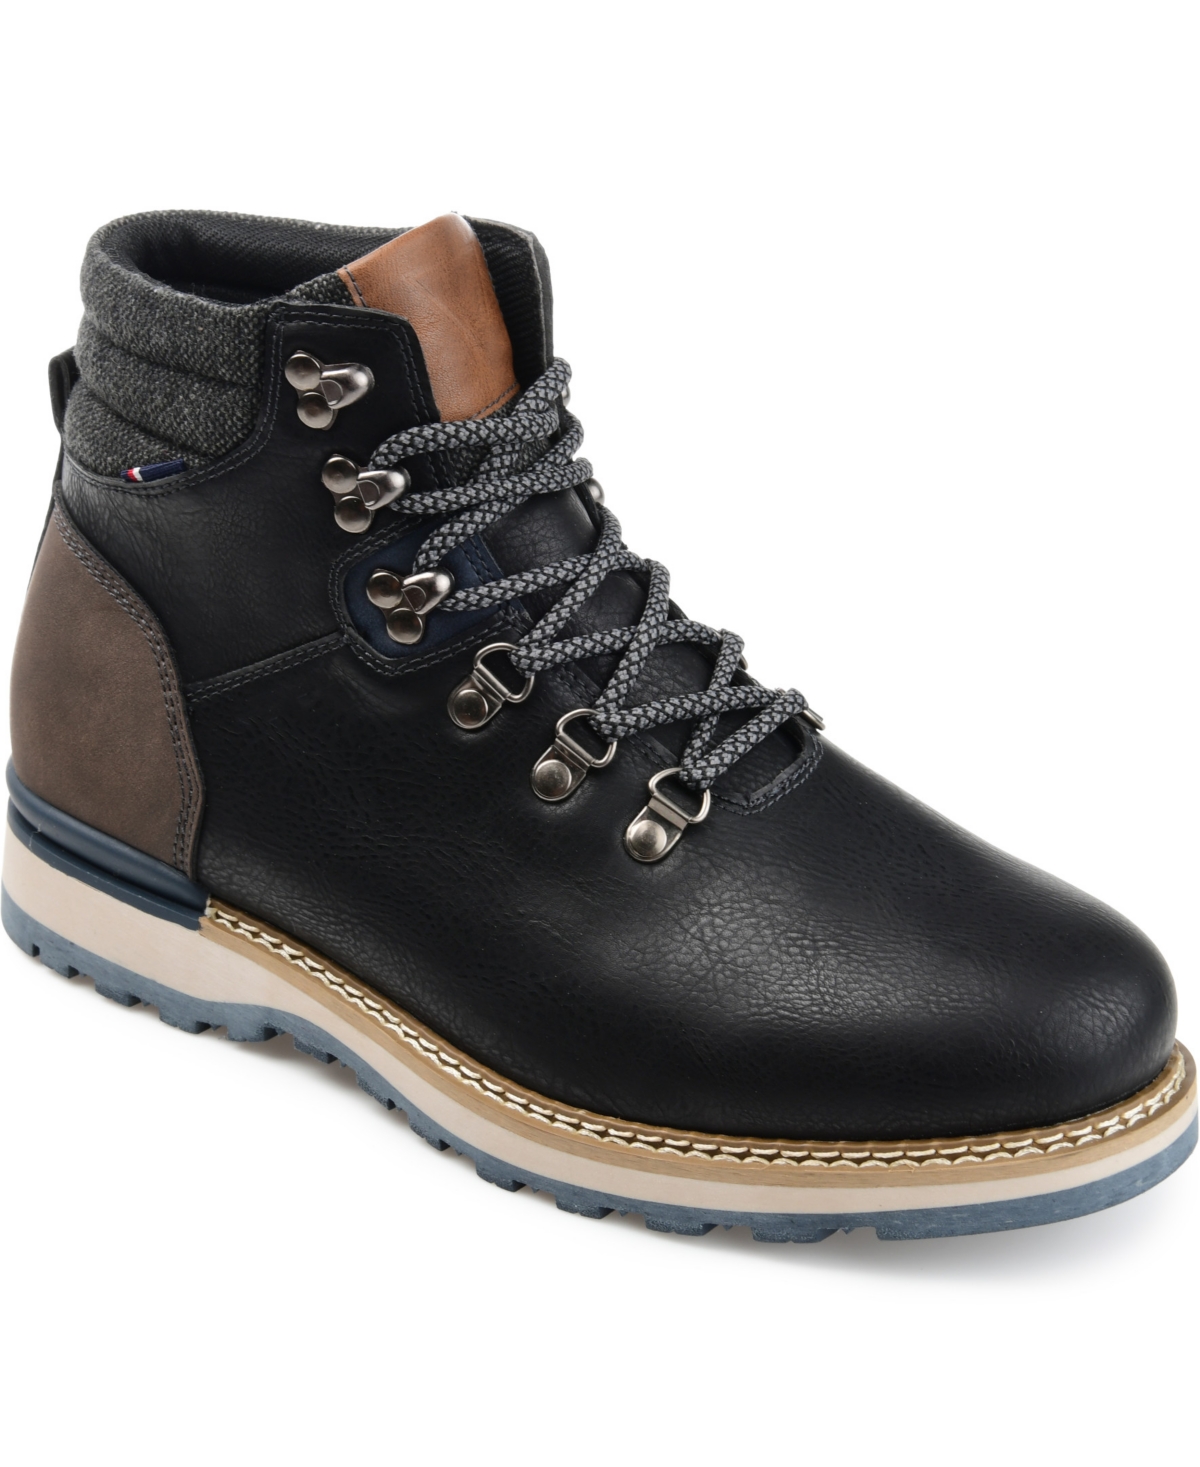 Men's Zane Ankle Boots - Brown